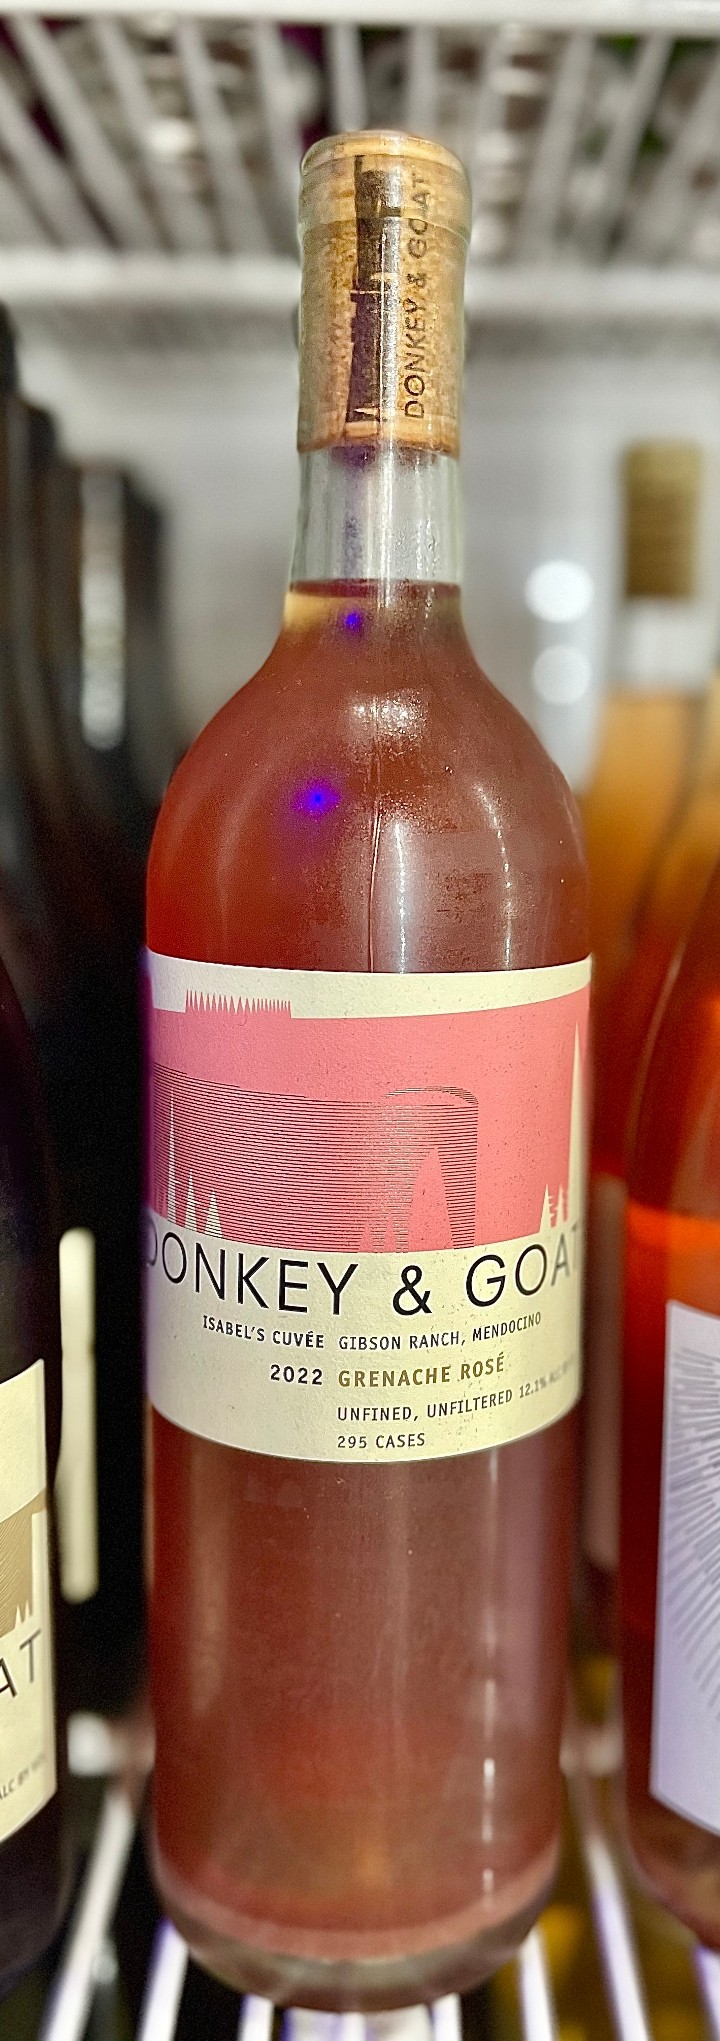 Donkey and Goat Isabel's Cuvee Grenache Rosé, Mendocino  2022